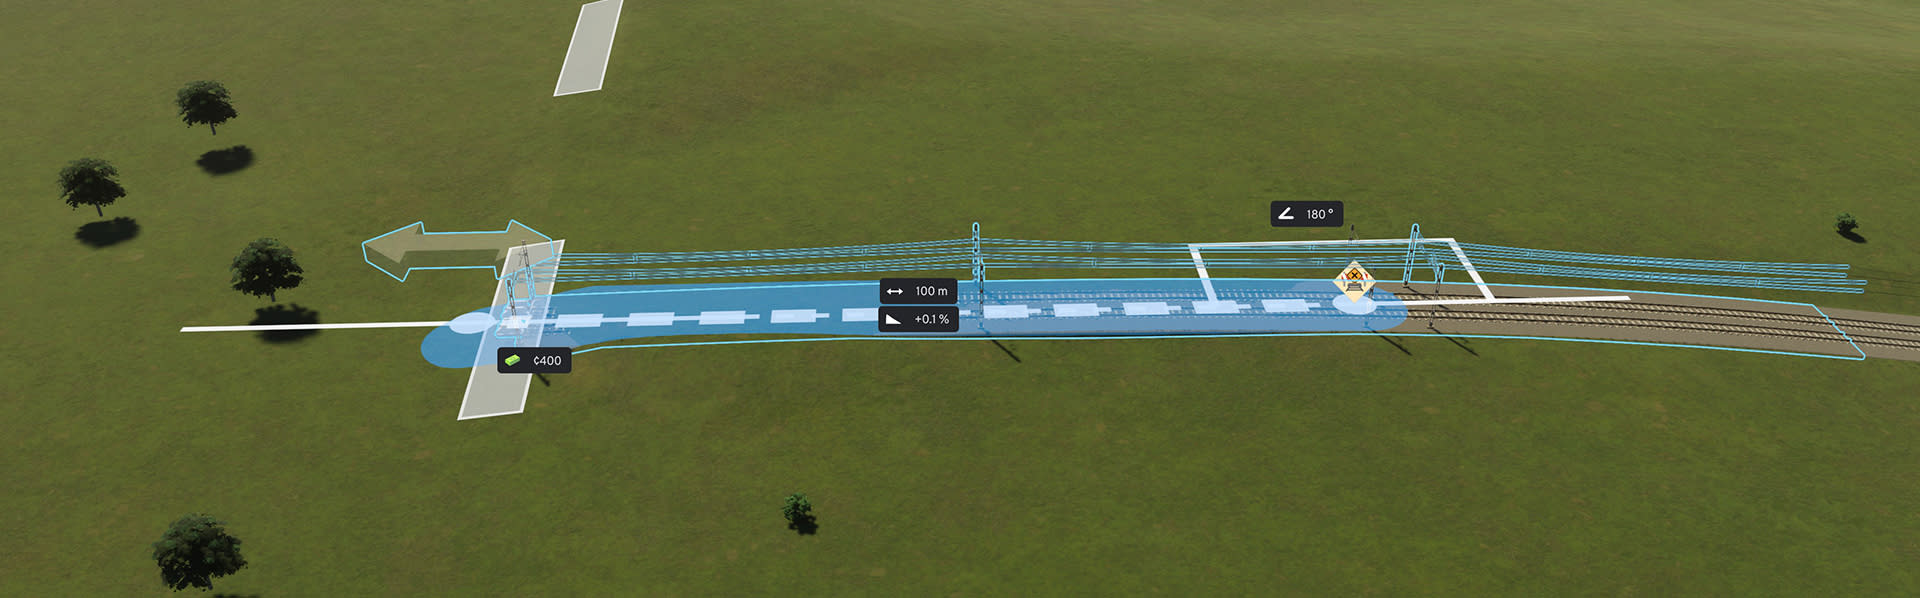 cities-skylines-11-feature-7-13_Train_outside_connection.jpg